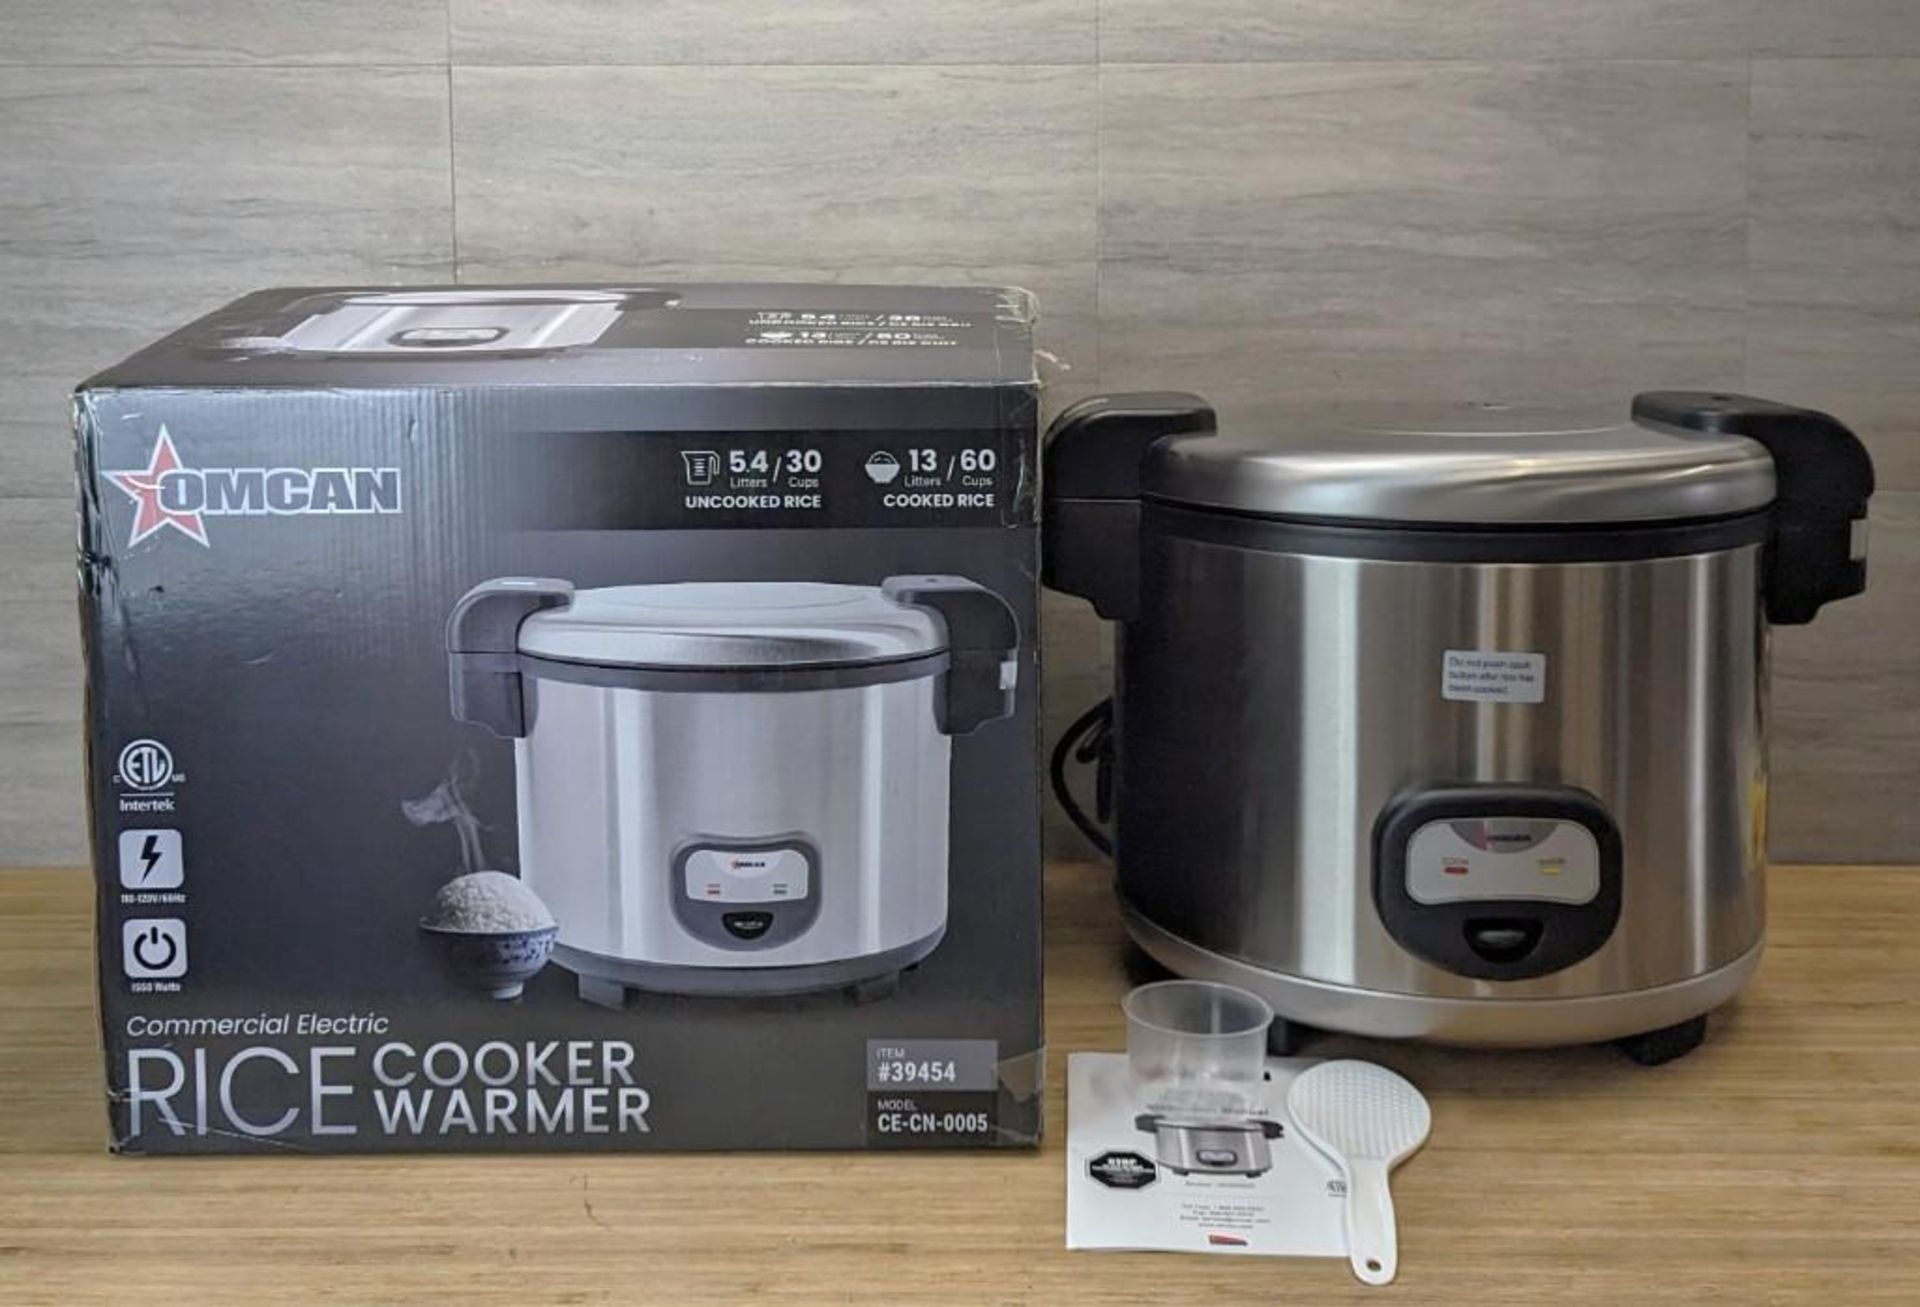 60 CUP COMMERCIAL RICE COOKER/WARMER, OMCAN 39454 - NEW - Image 9 of 10